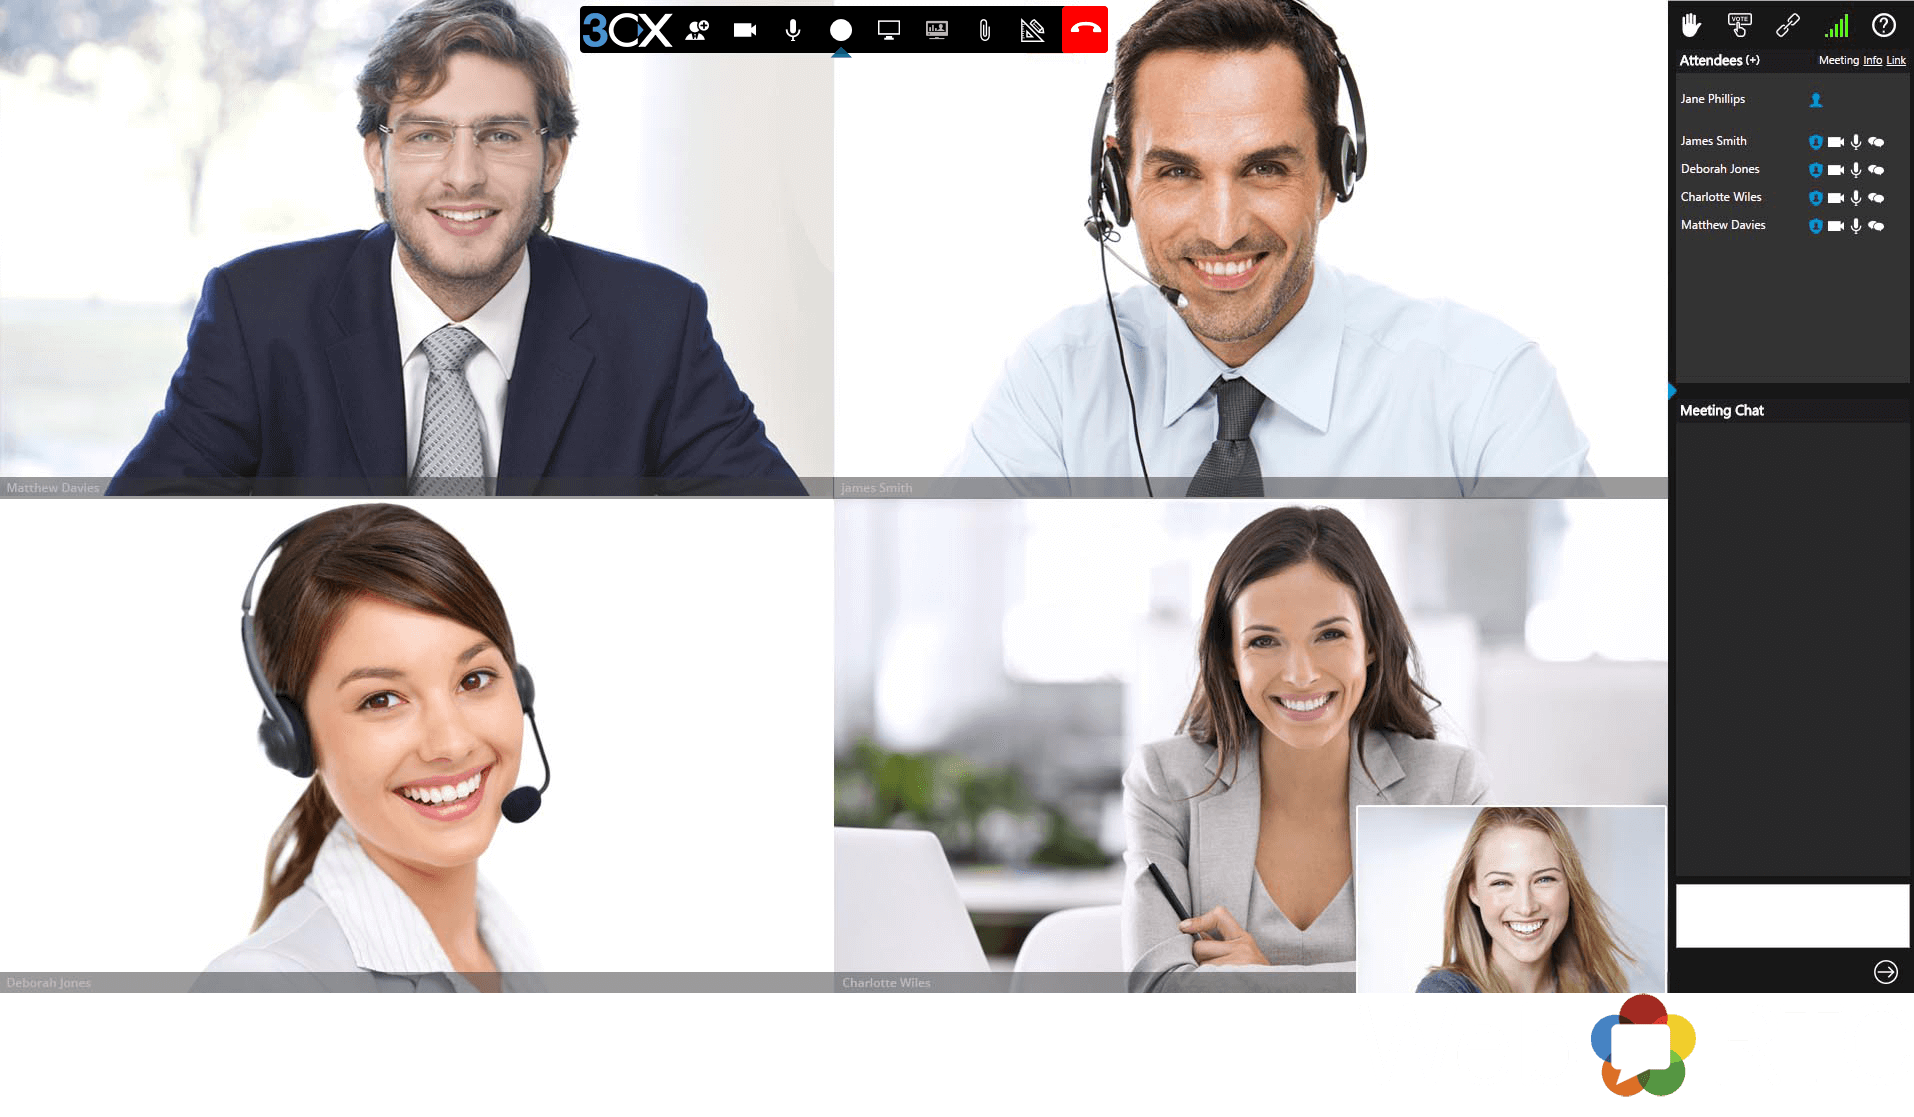 Web_conferencing_with_3CX